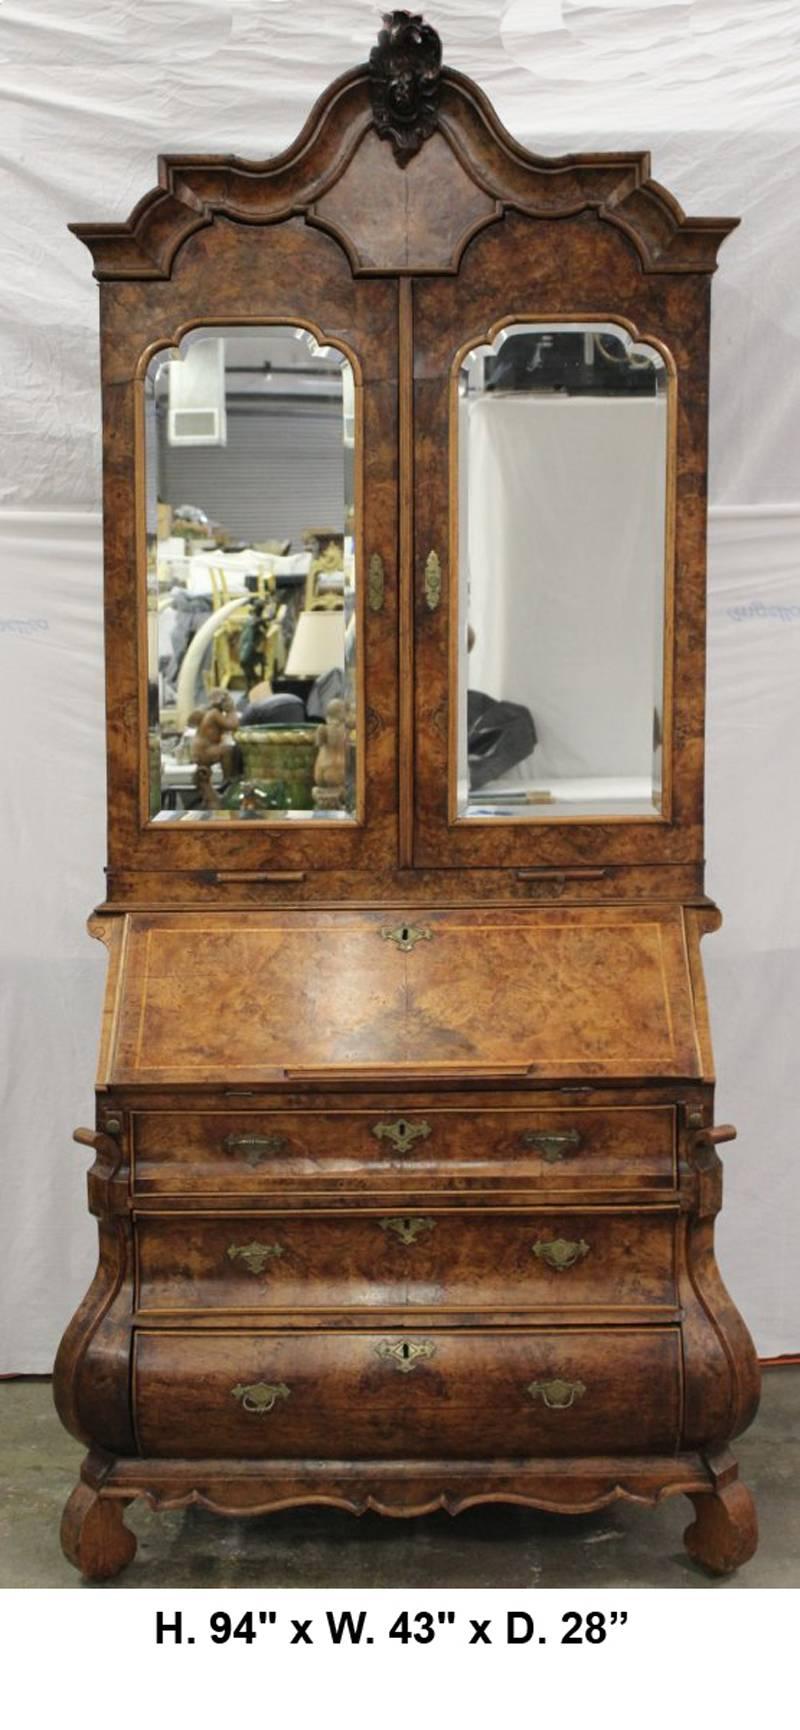 Fine 18th century Dutch Baroque burl walnut veneered secretary cabinet. The intricately carved crown centers the curved cornice tops two mirrored doors revealing shelving and two small drawers over two beautiful pullout candle stands. The slant